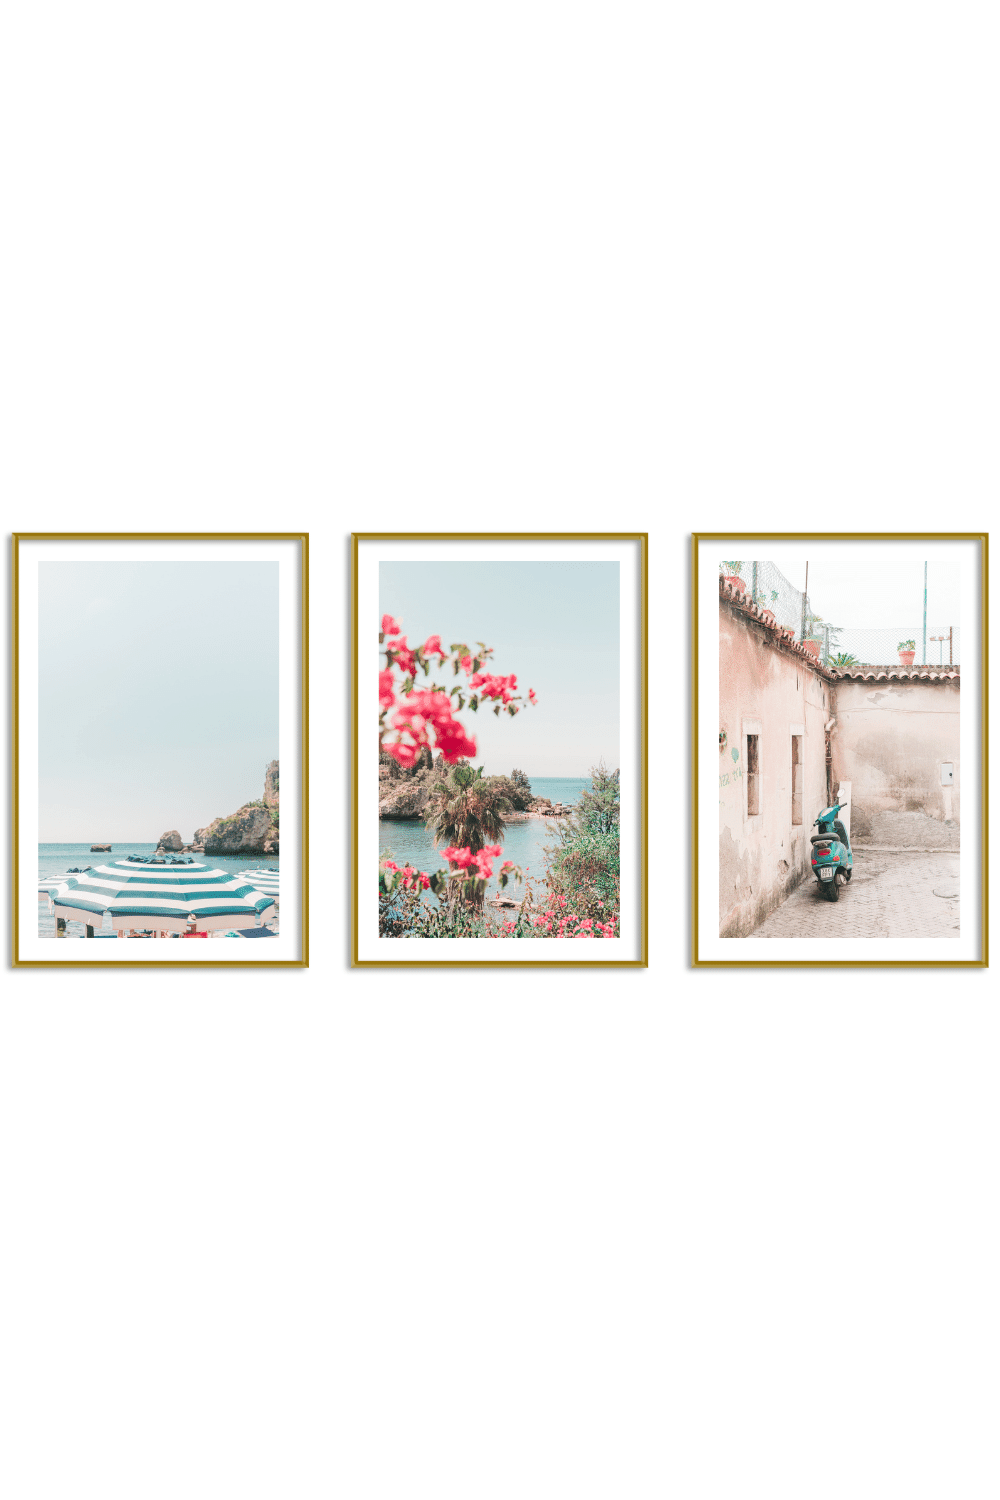 Gallery Wall Set of 3 - Art Print Set of 3 - Summer in Italy